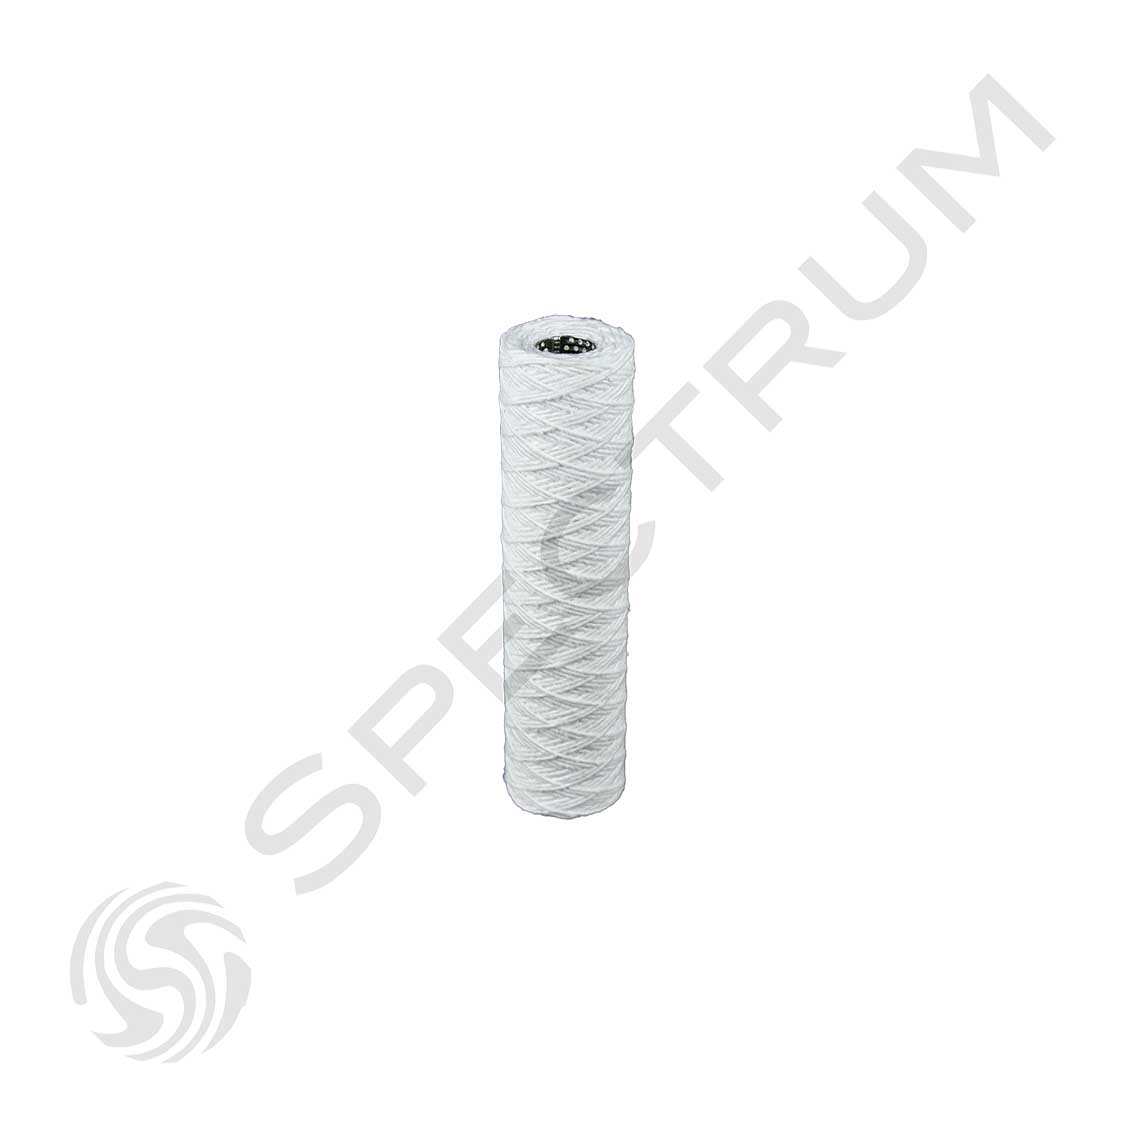 SPECTRUM SWC-75-10 Wound Cotton Filter Cartridge with Stainless Steel Core  75 micron  10